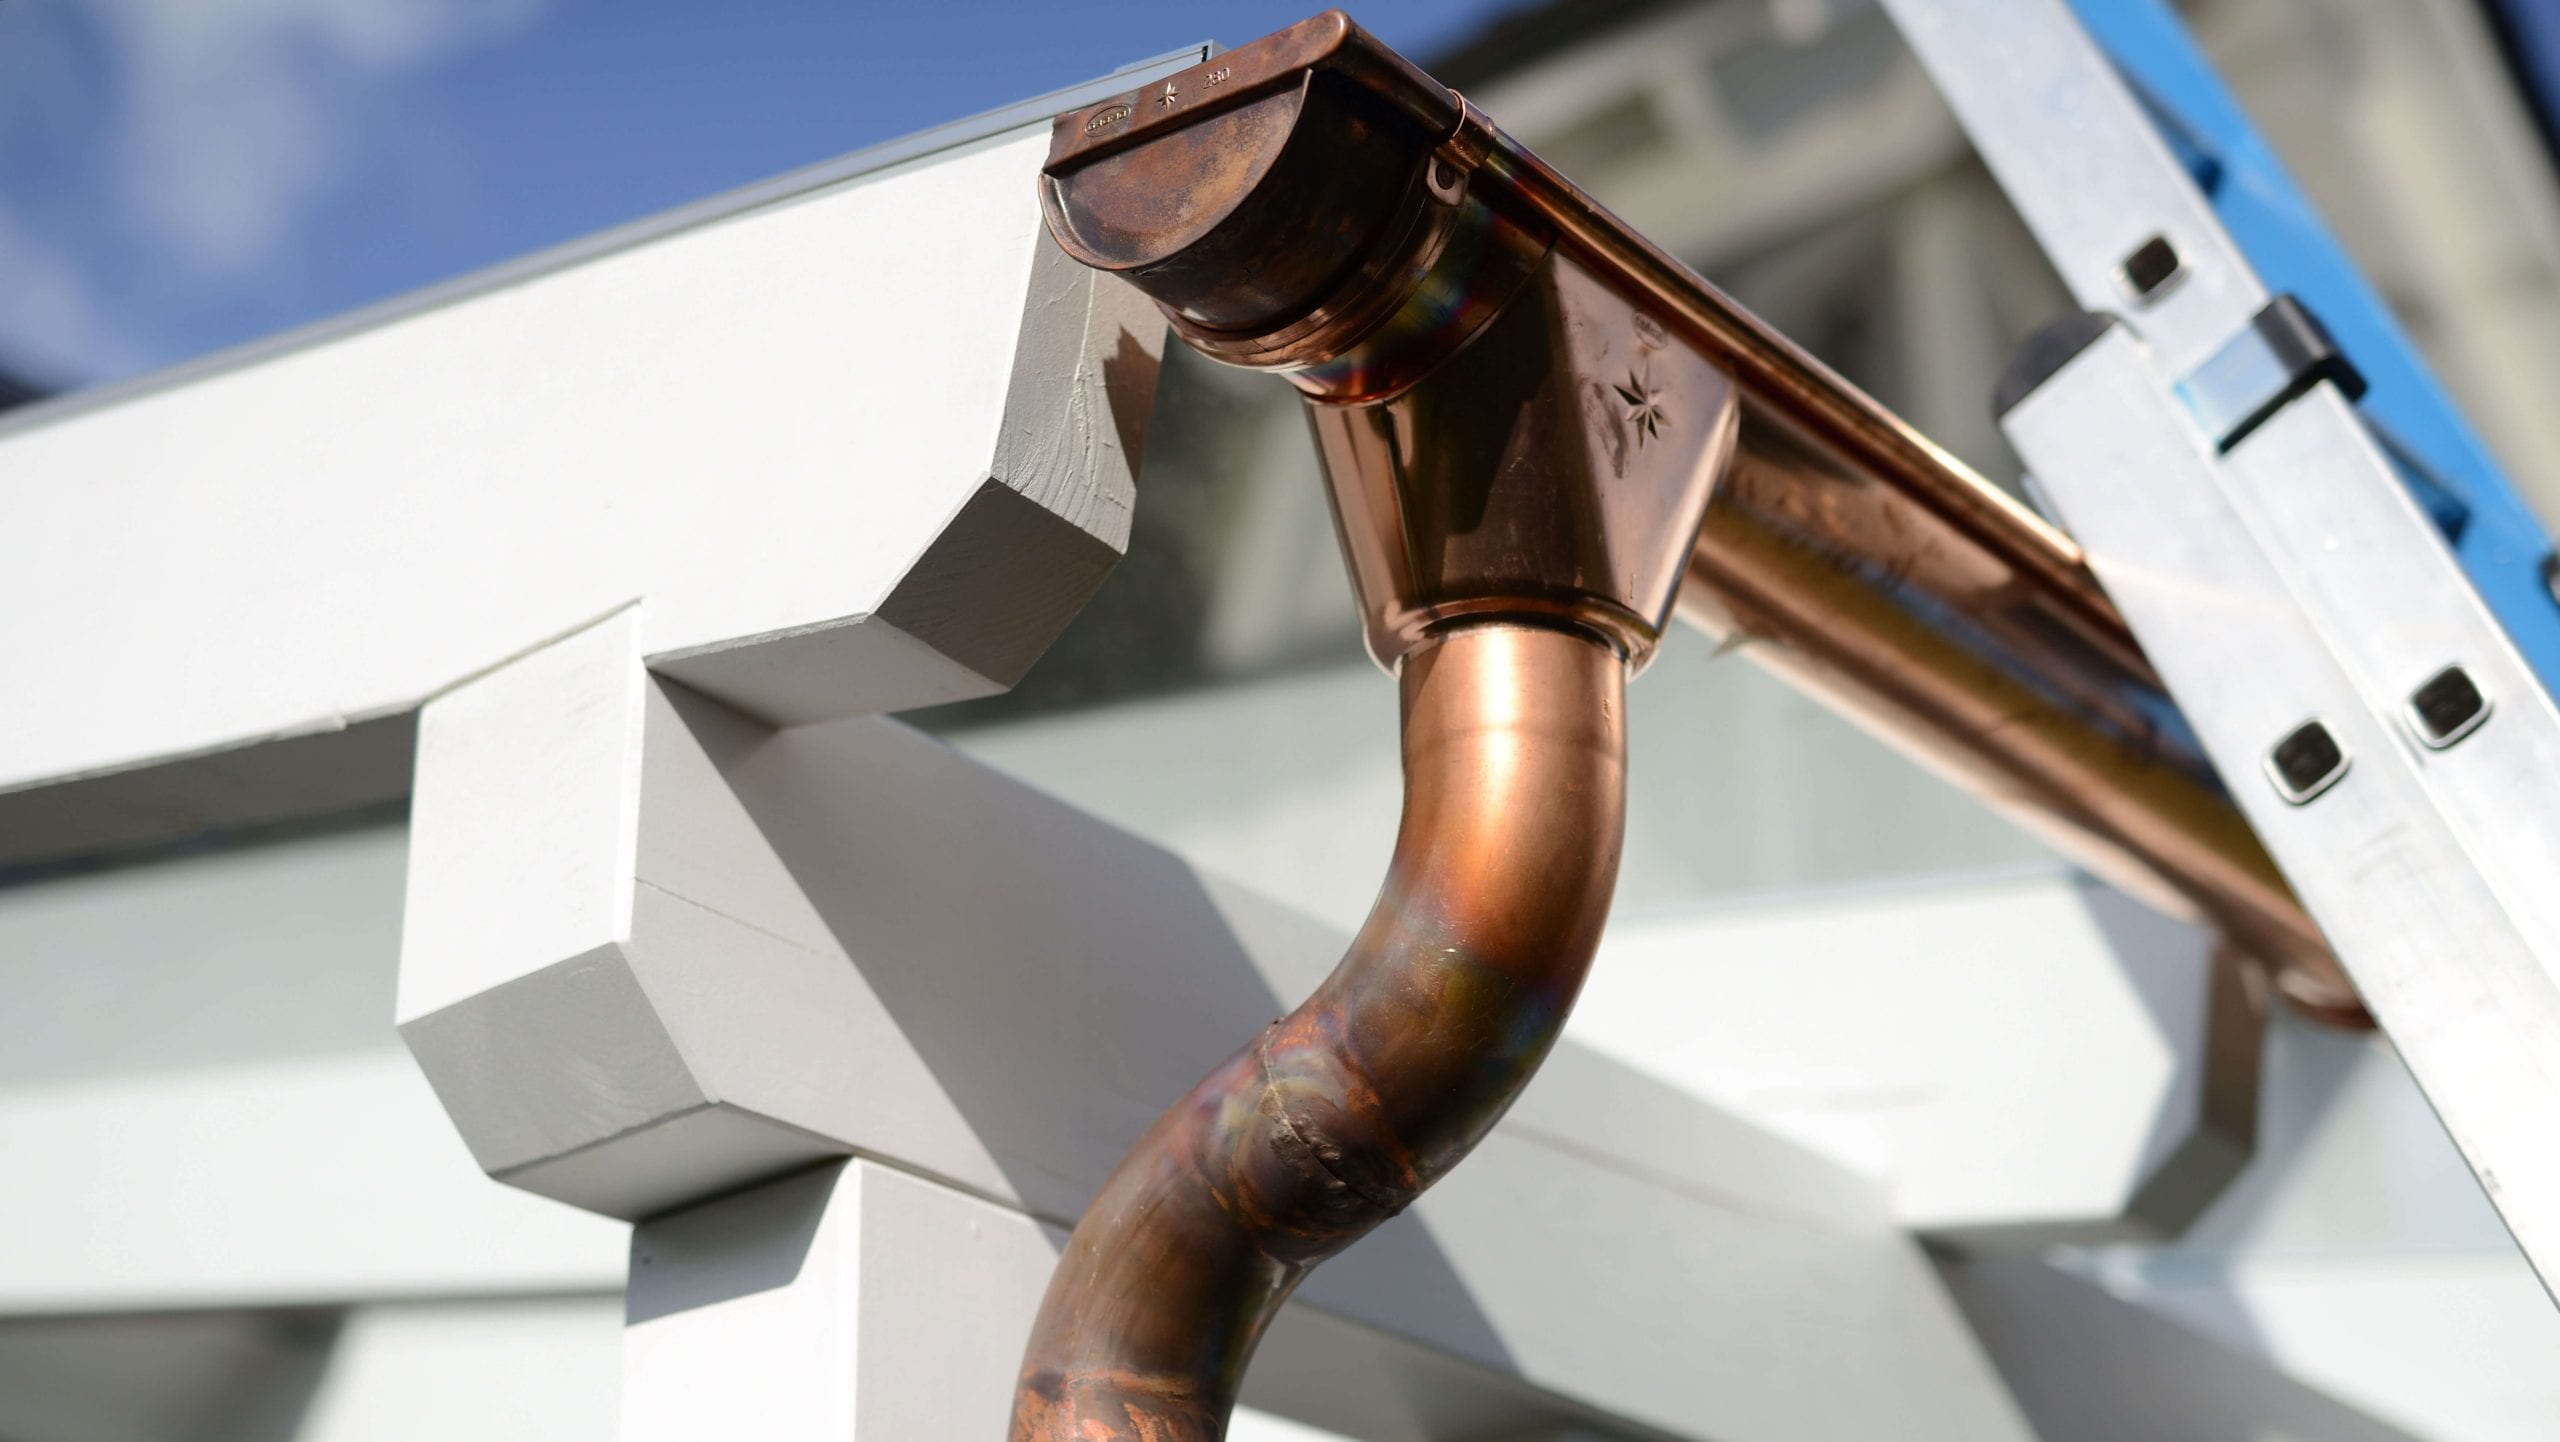 Make your property stand out with copper gutters. Contact for gutter installation in Madison